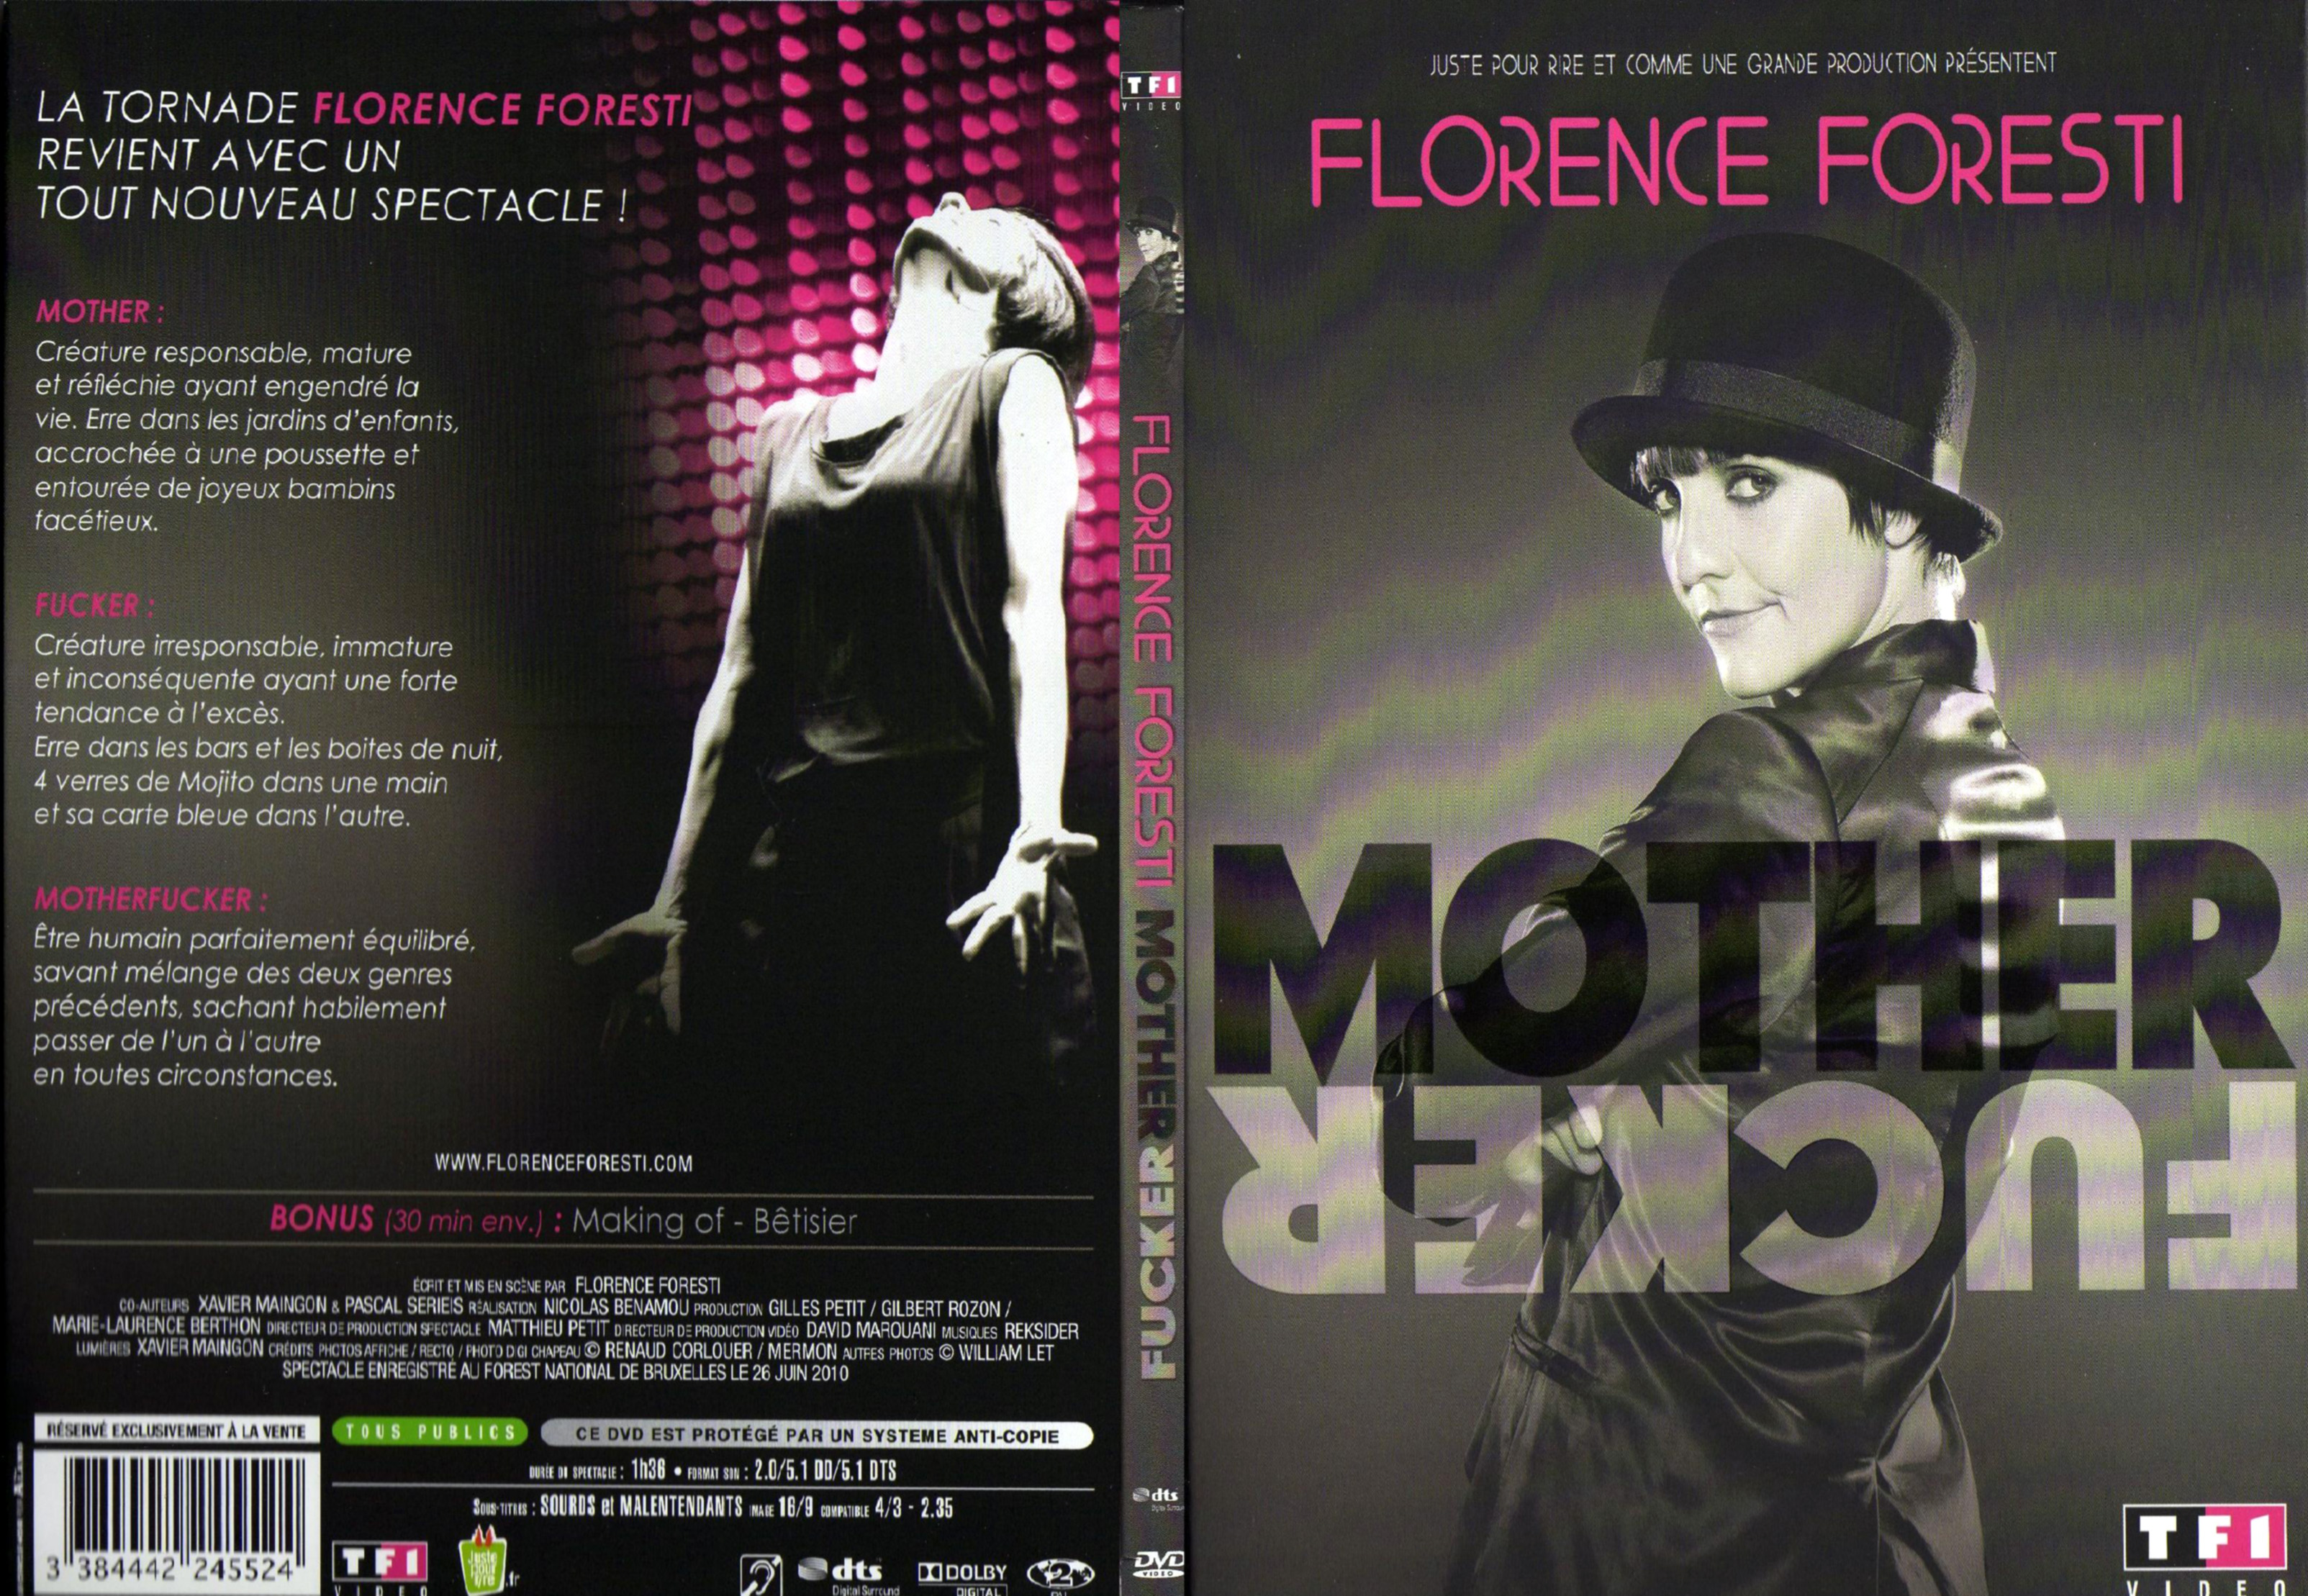 Jaquette DVD Florence Foresti Mother fucker